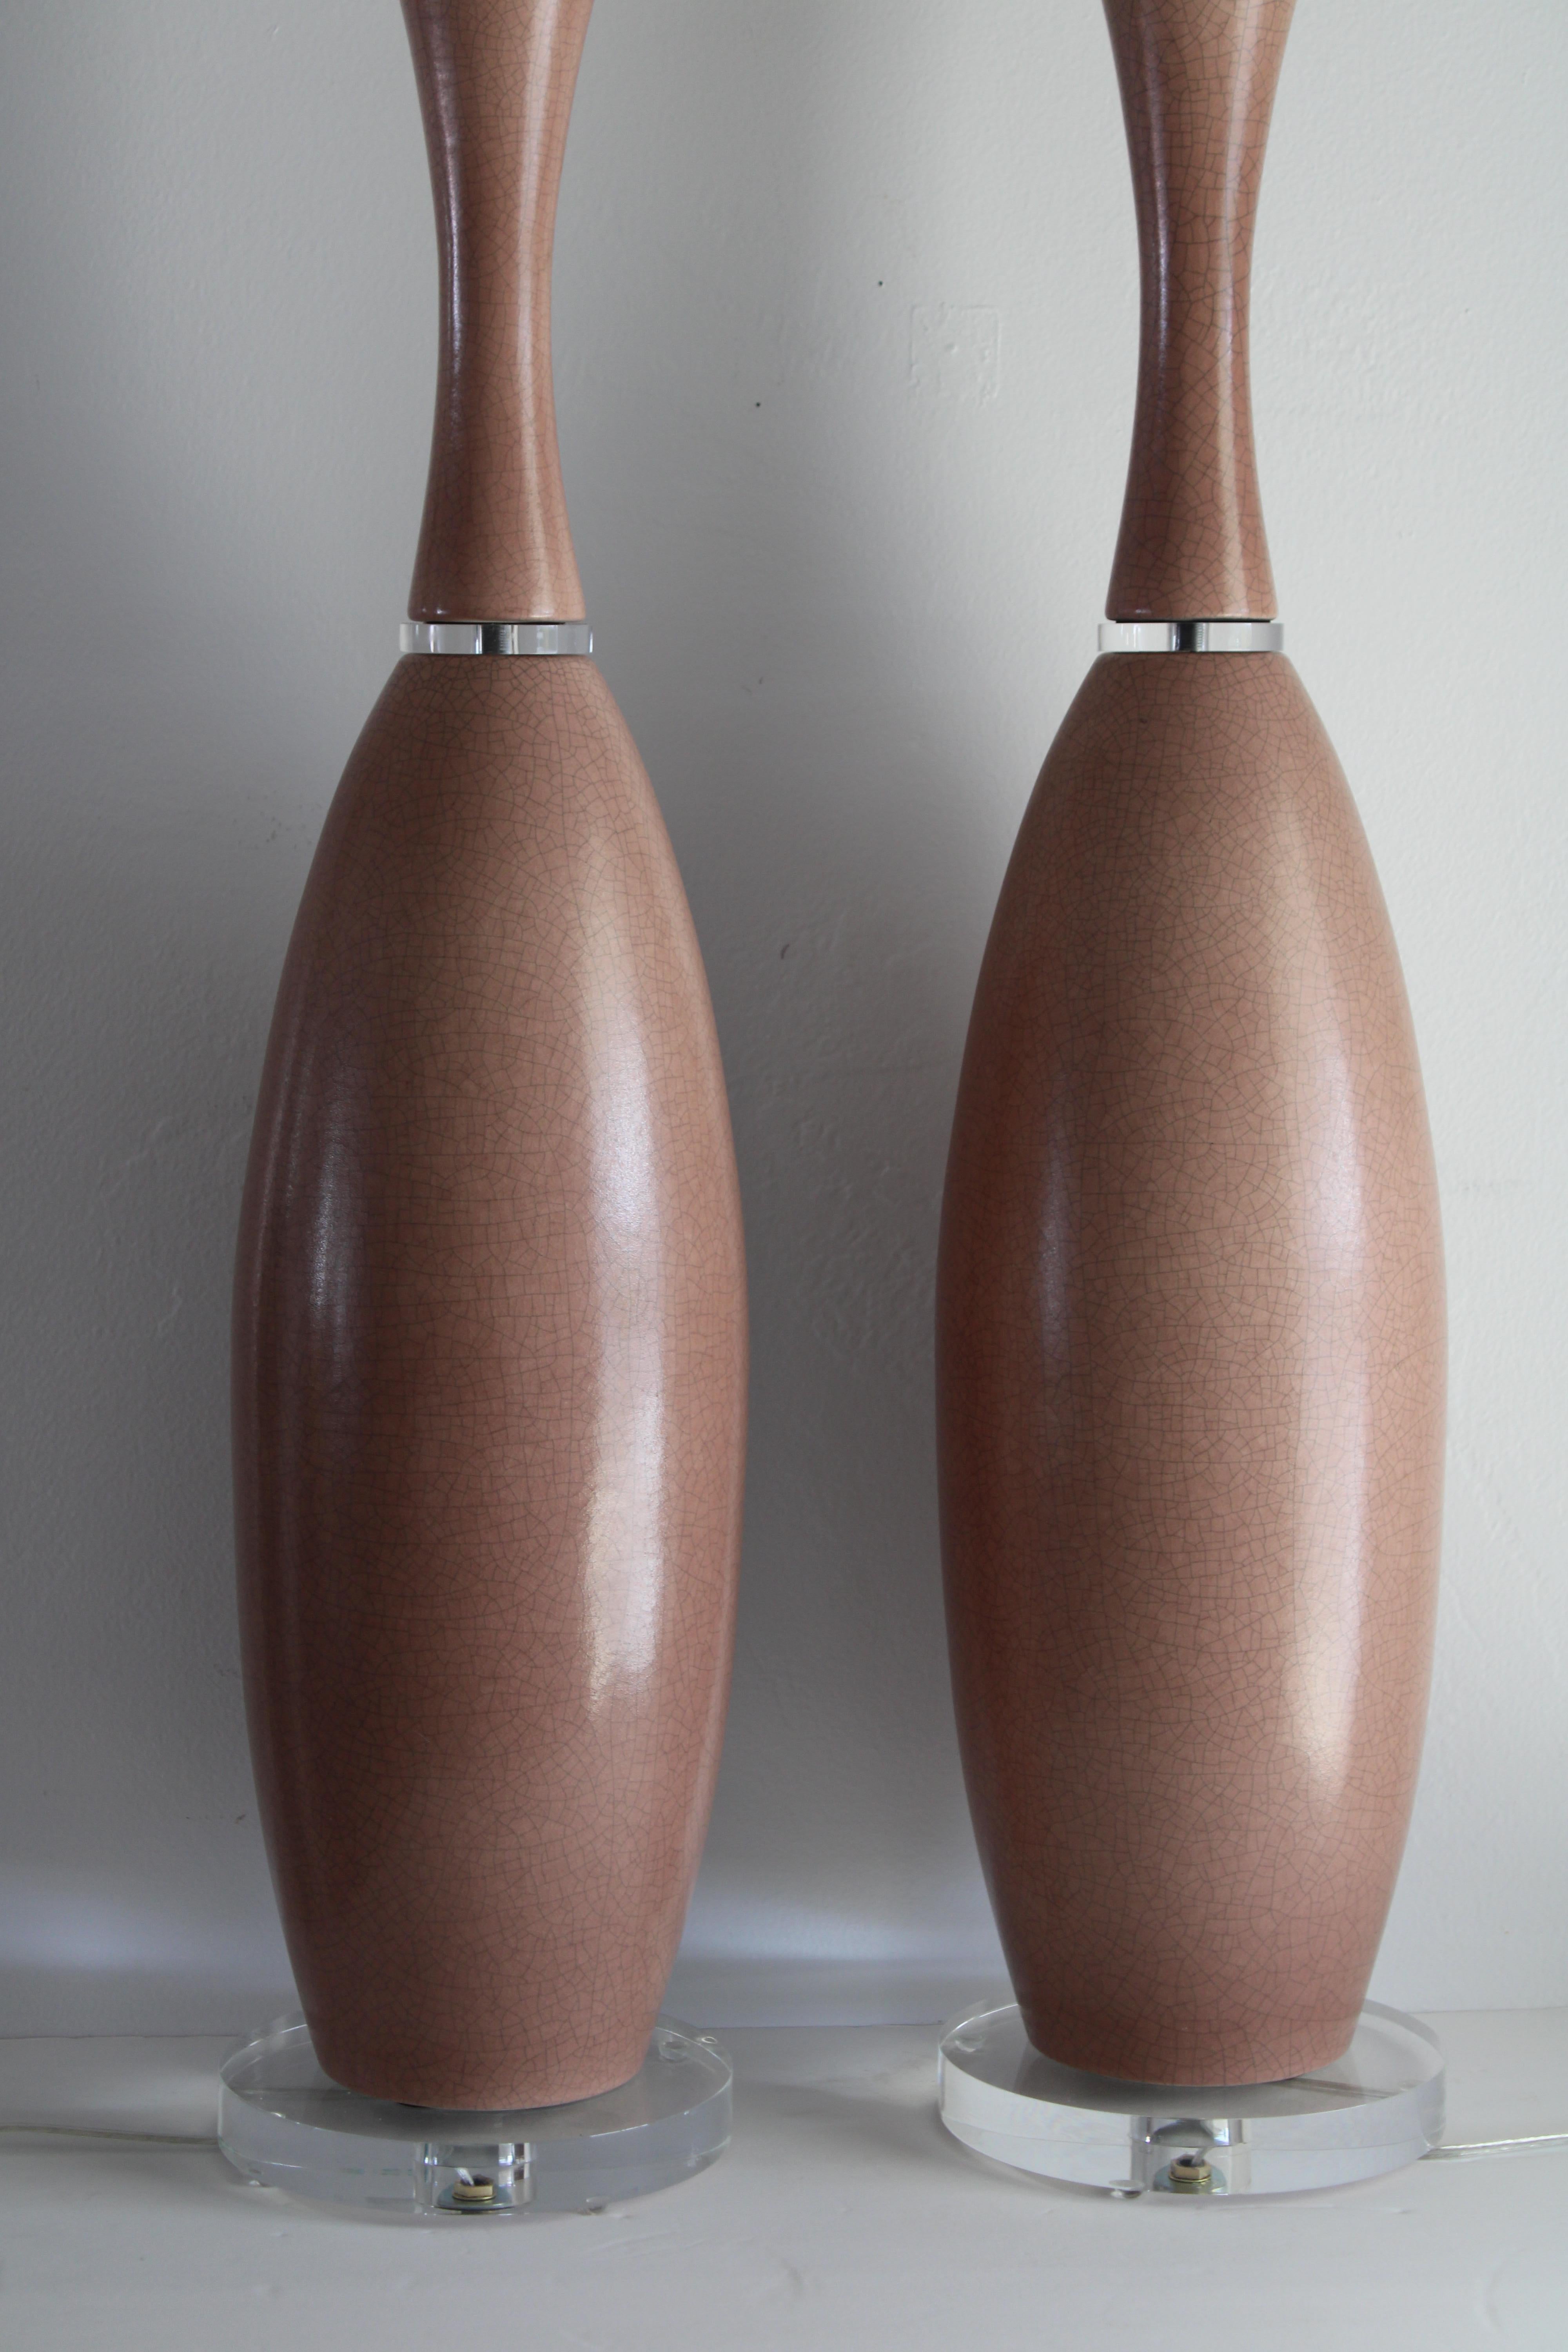 Pair of mauve ceramic lamps on lucite bases. We removed the brass base and mid section and replaced them with lucite. The top portion of the canopy where the brass neck is attached is still part of these lamps. Lamps have been professionally rewired